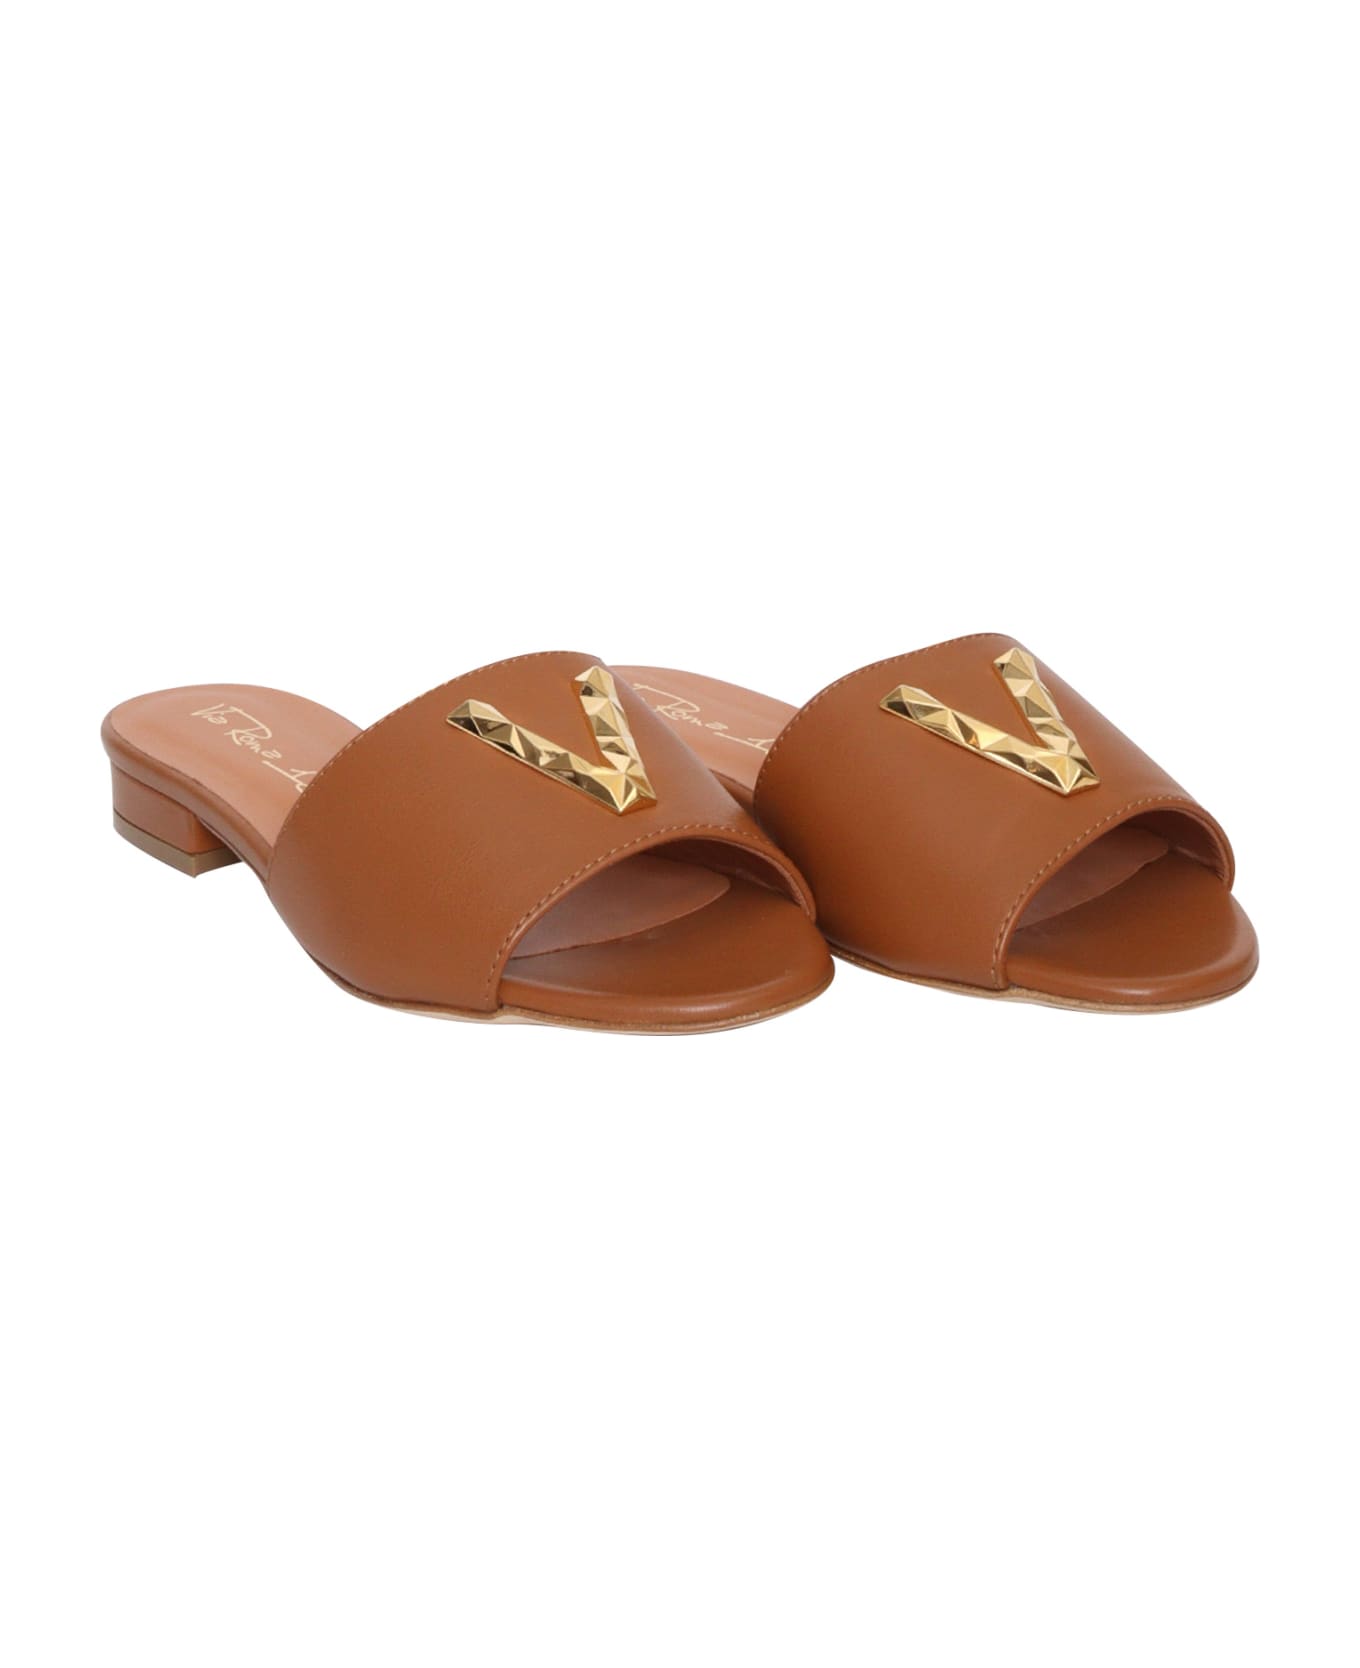 Via Roma 15 Brown Leather Slippers - BROWN